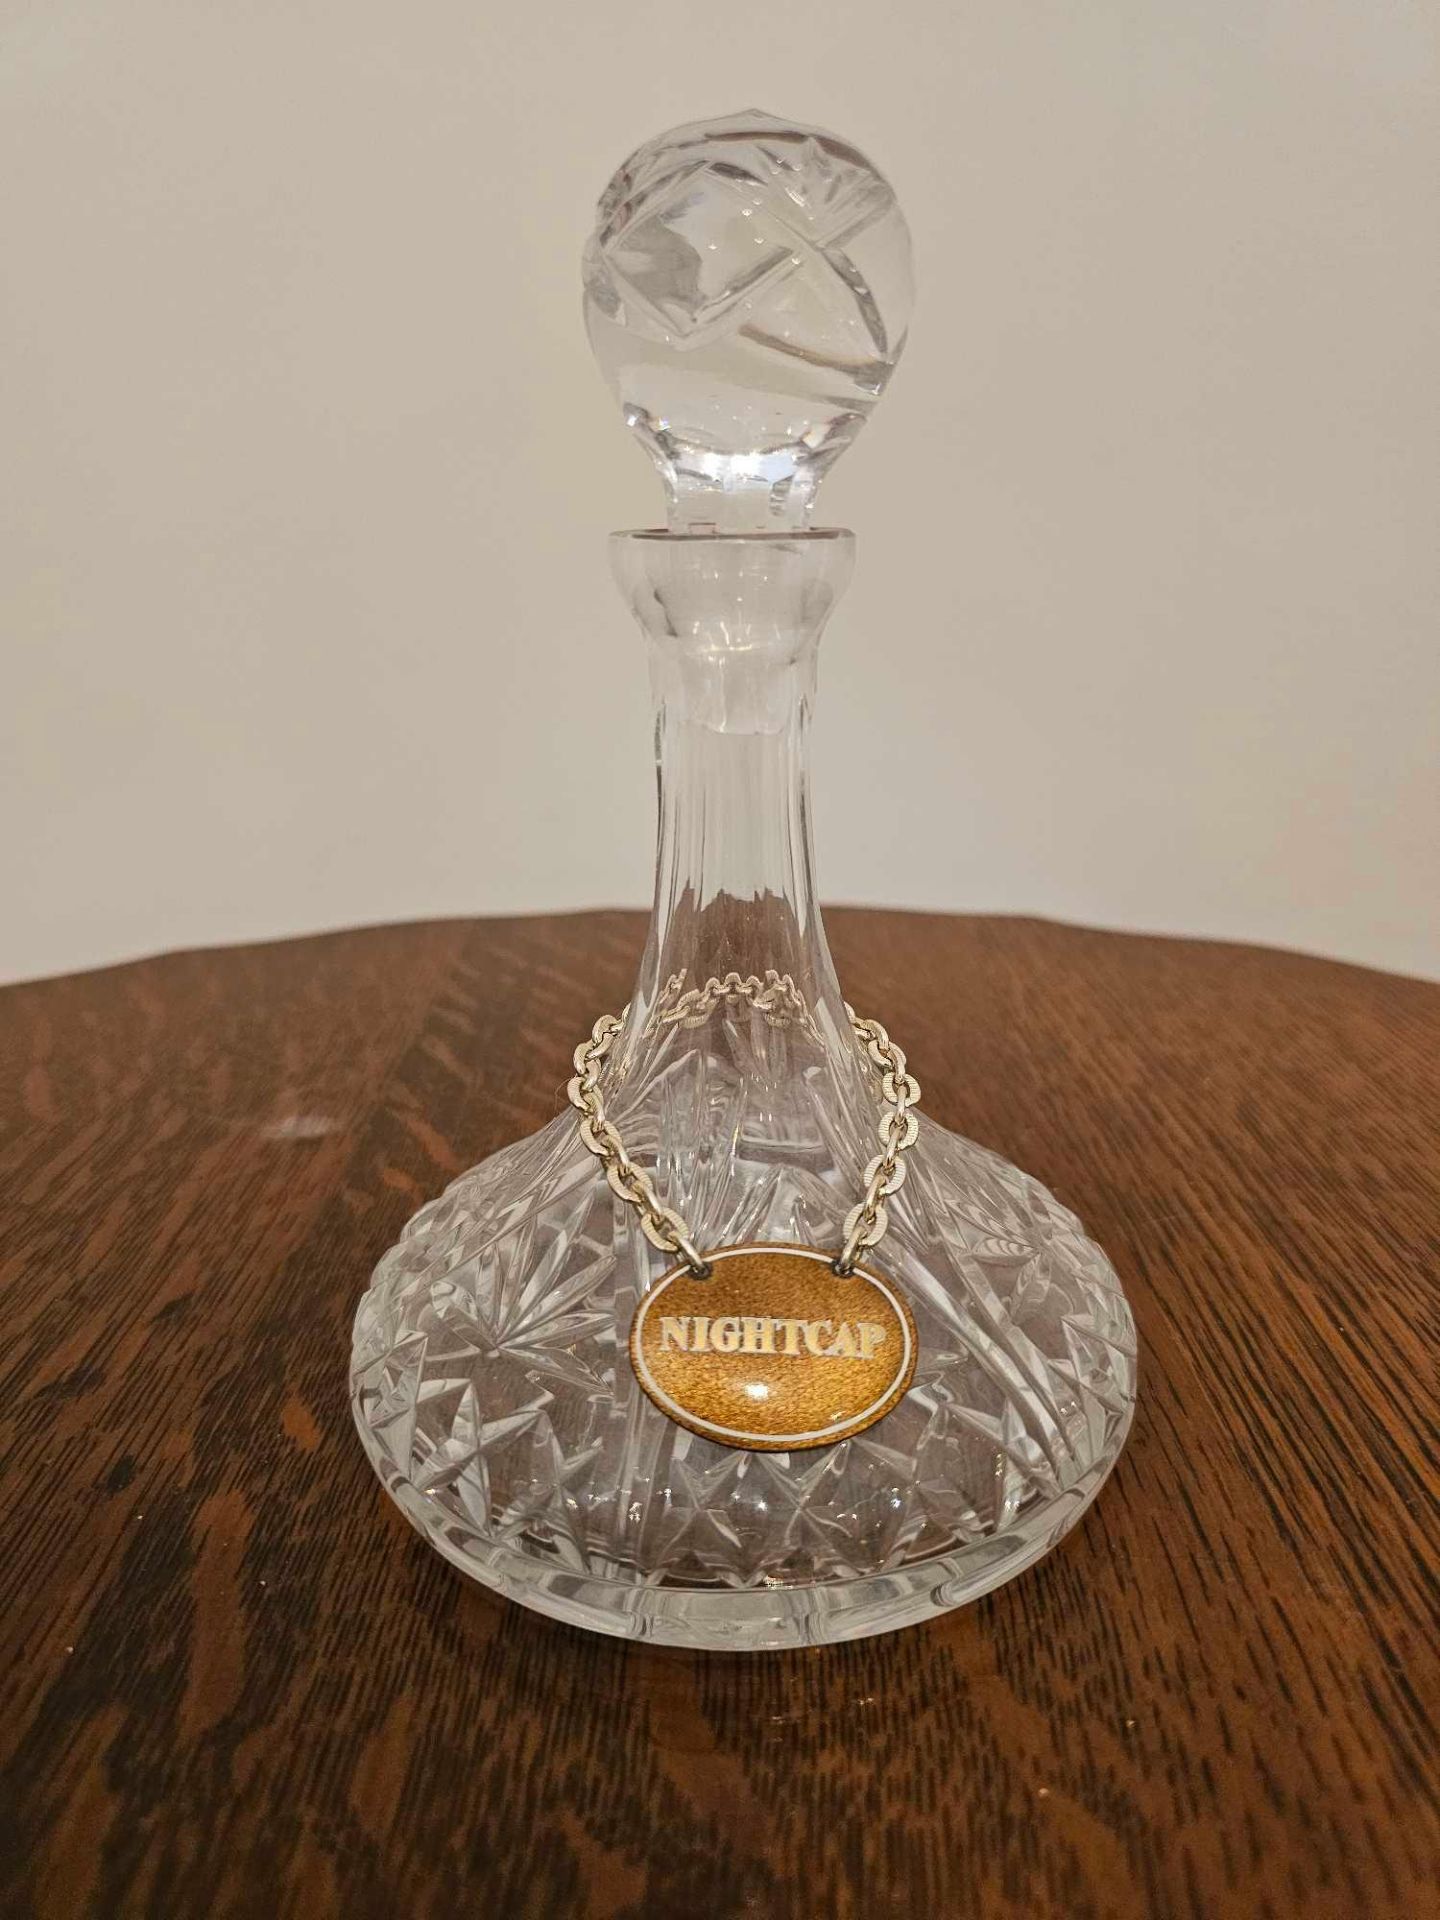 A Small Ship Style Crystal Decanter With Nightcap Plaque 17cm - Image 2 of 4